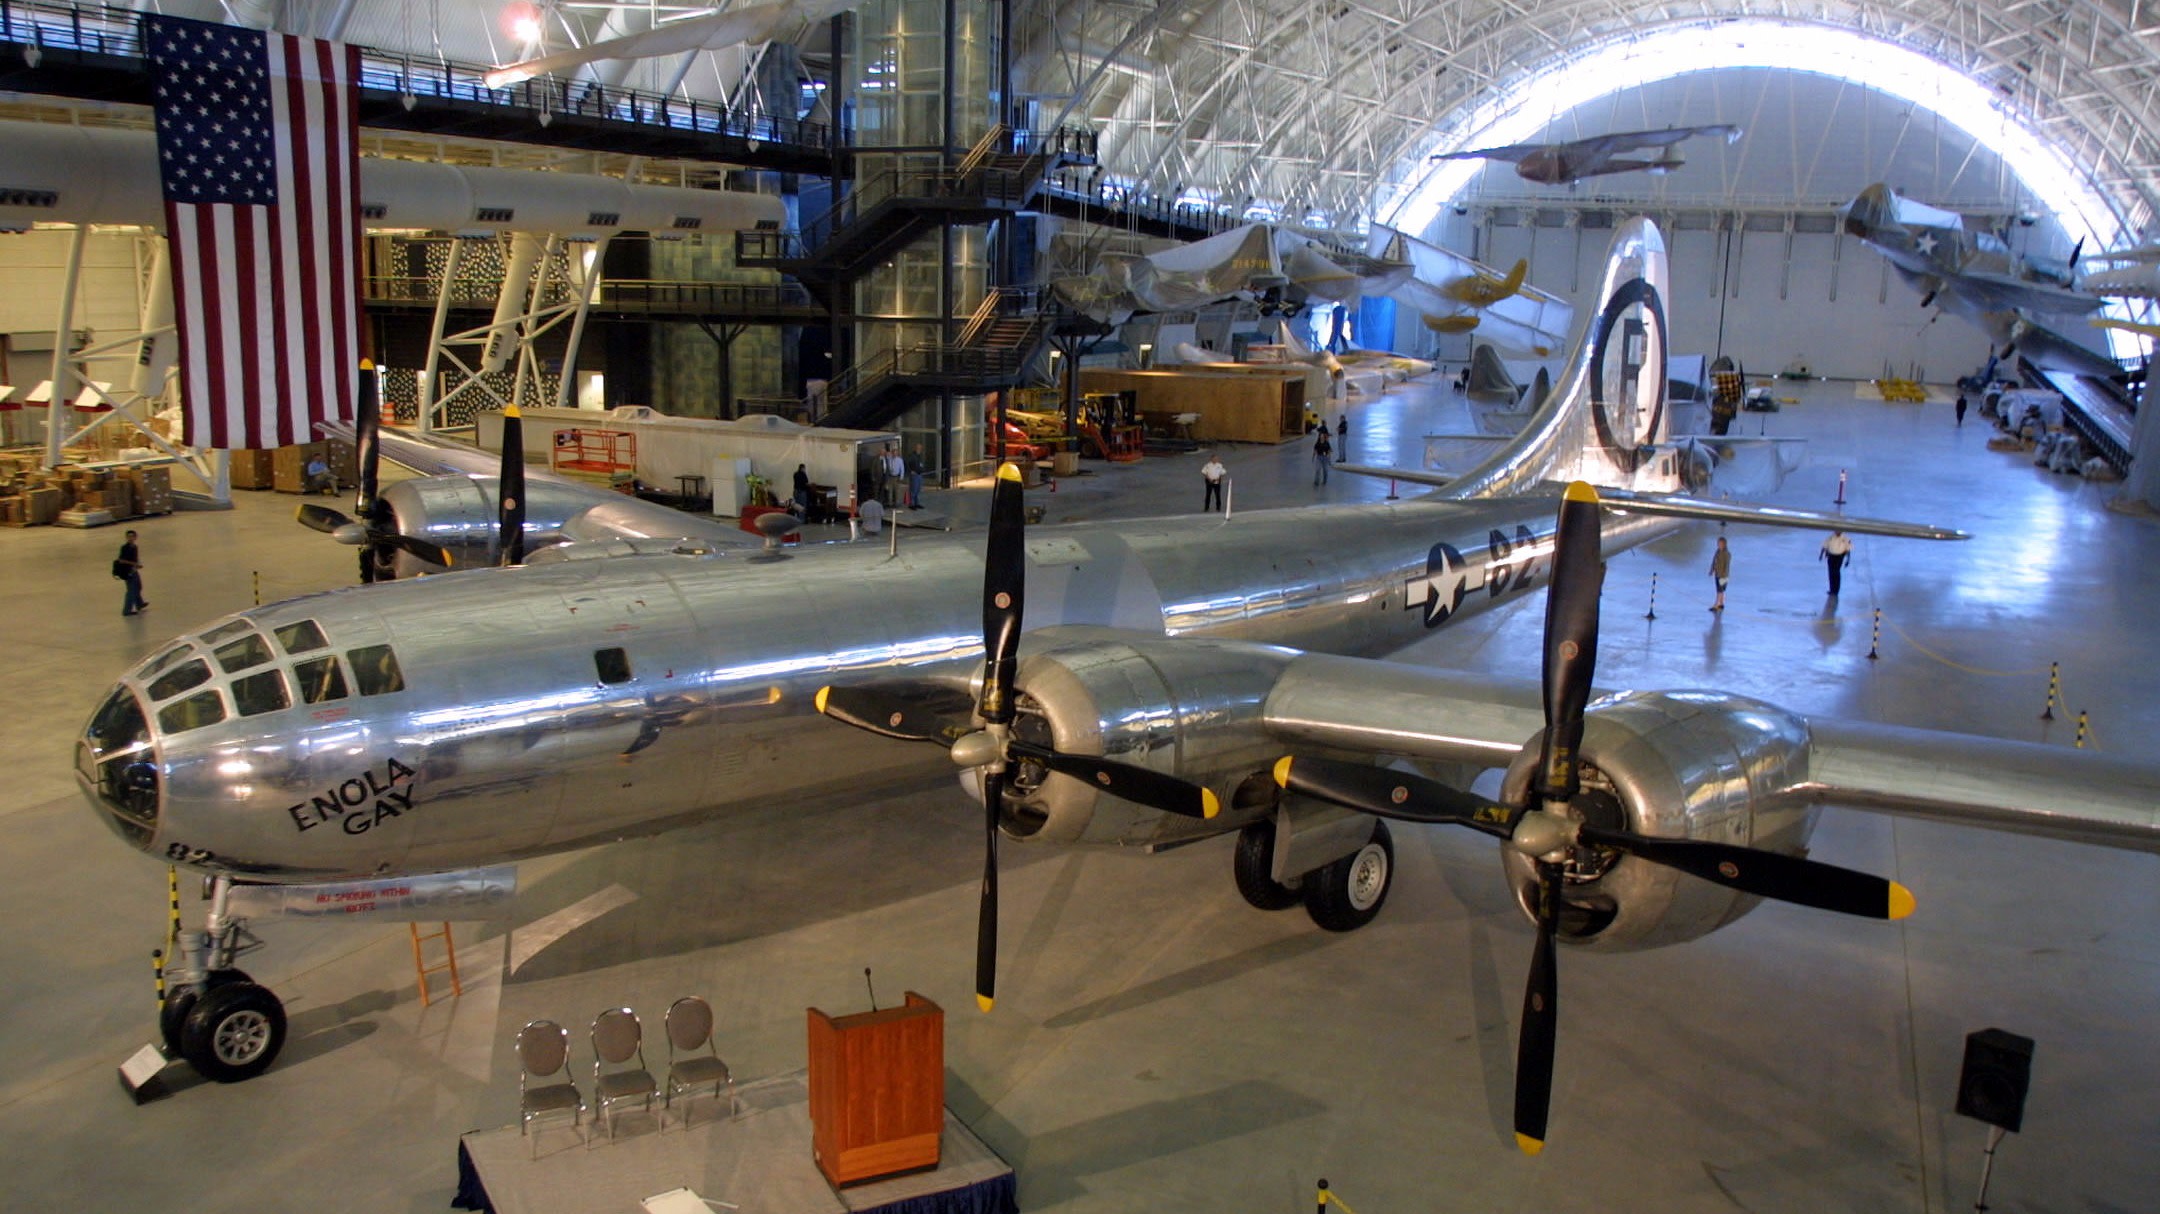 enola gay smithsonian exhibit planned for 1995